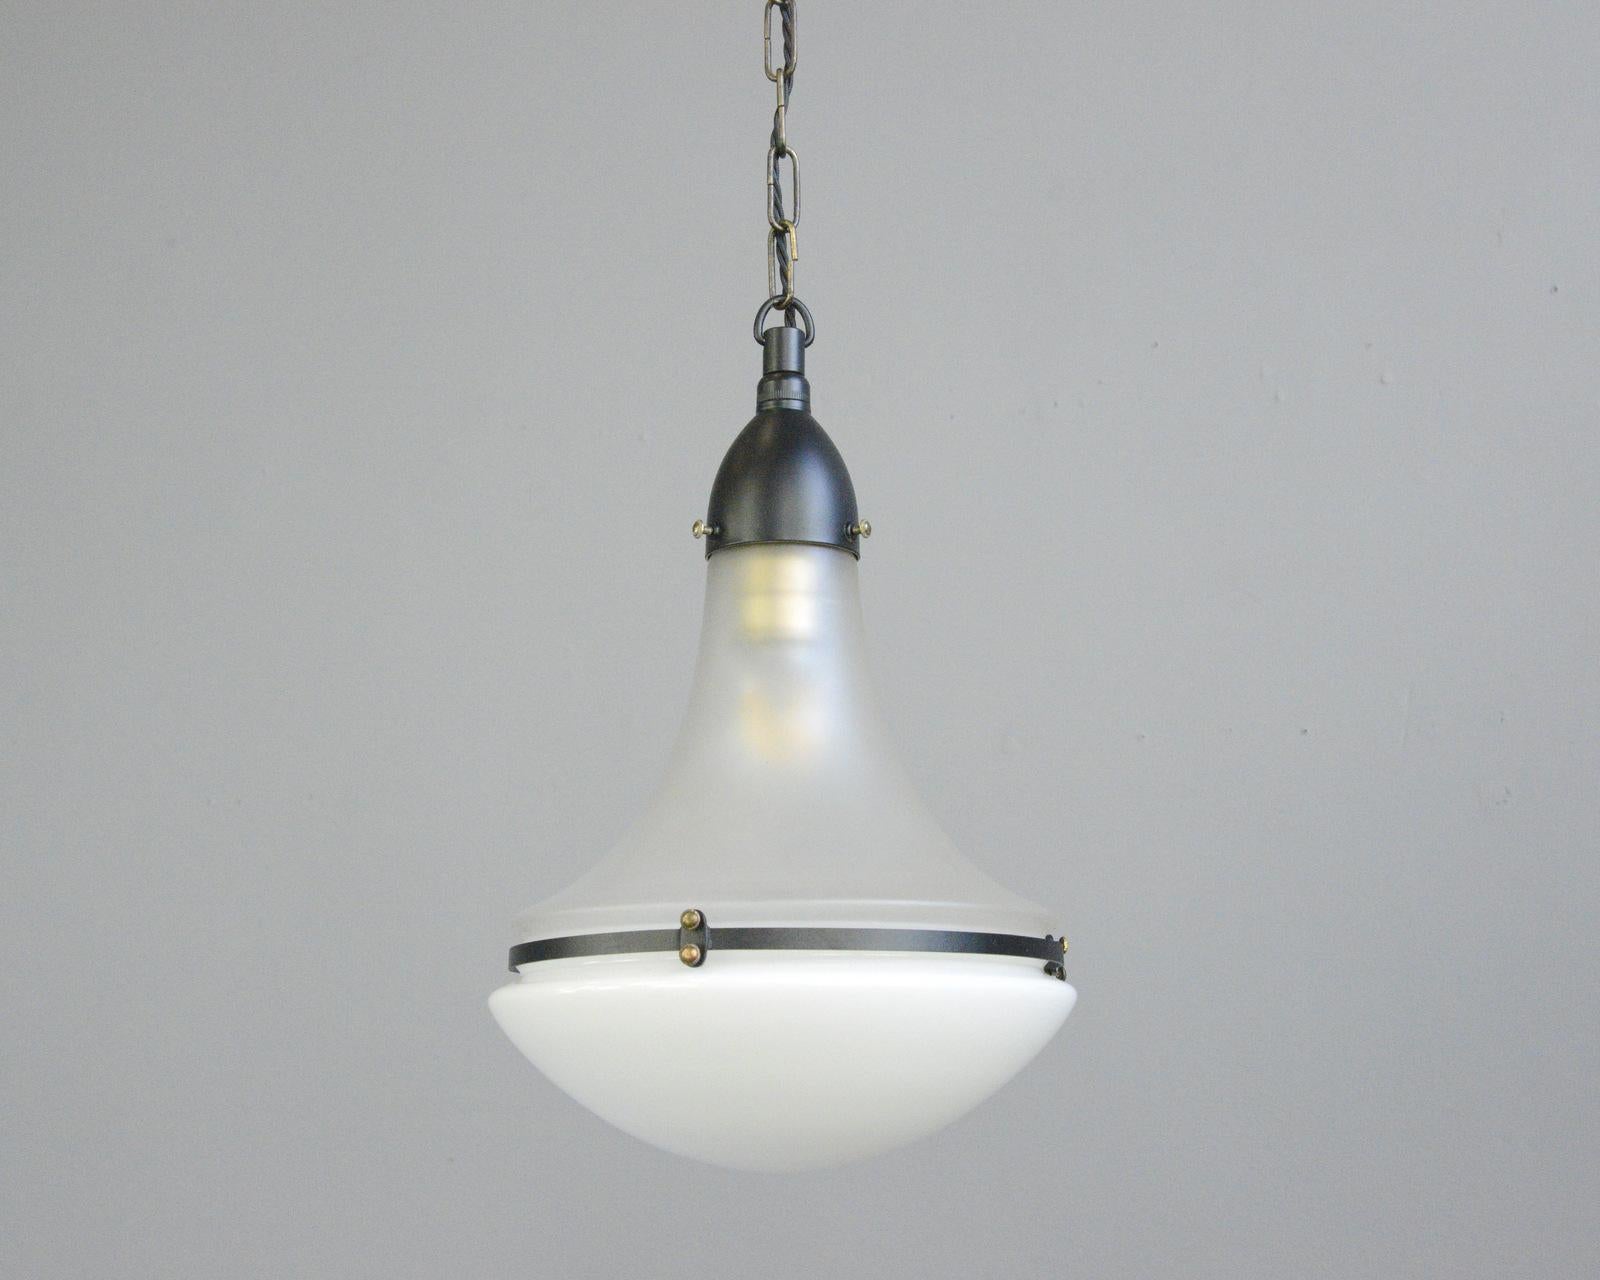 Early 20th Century Luzette Pendant Light by Peter Behrens for Siemens, circa 1920s